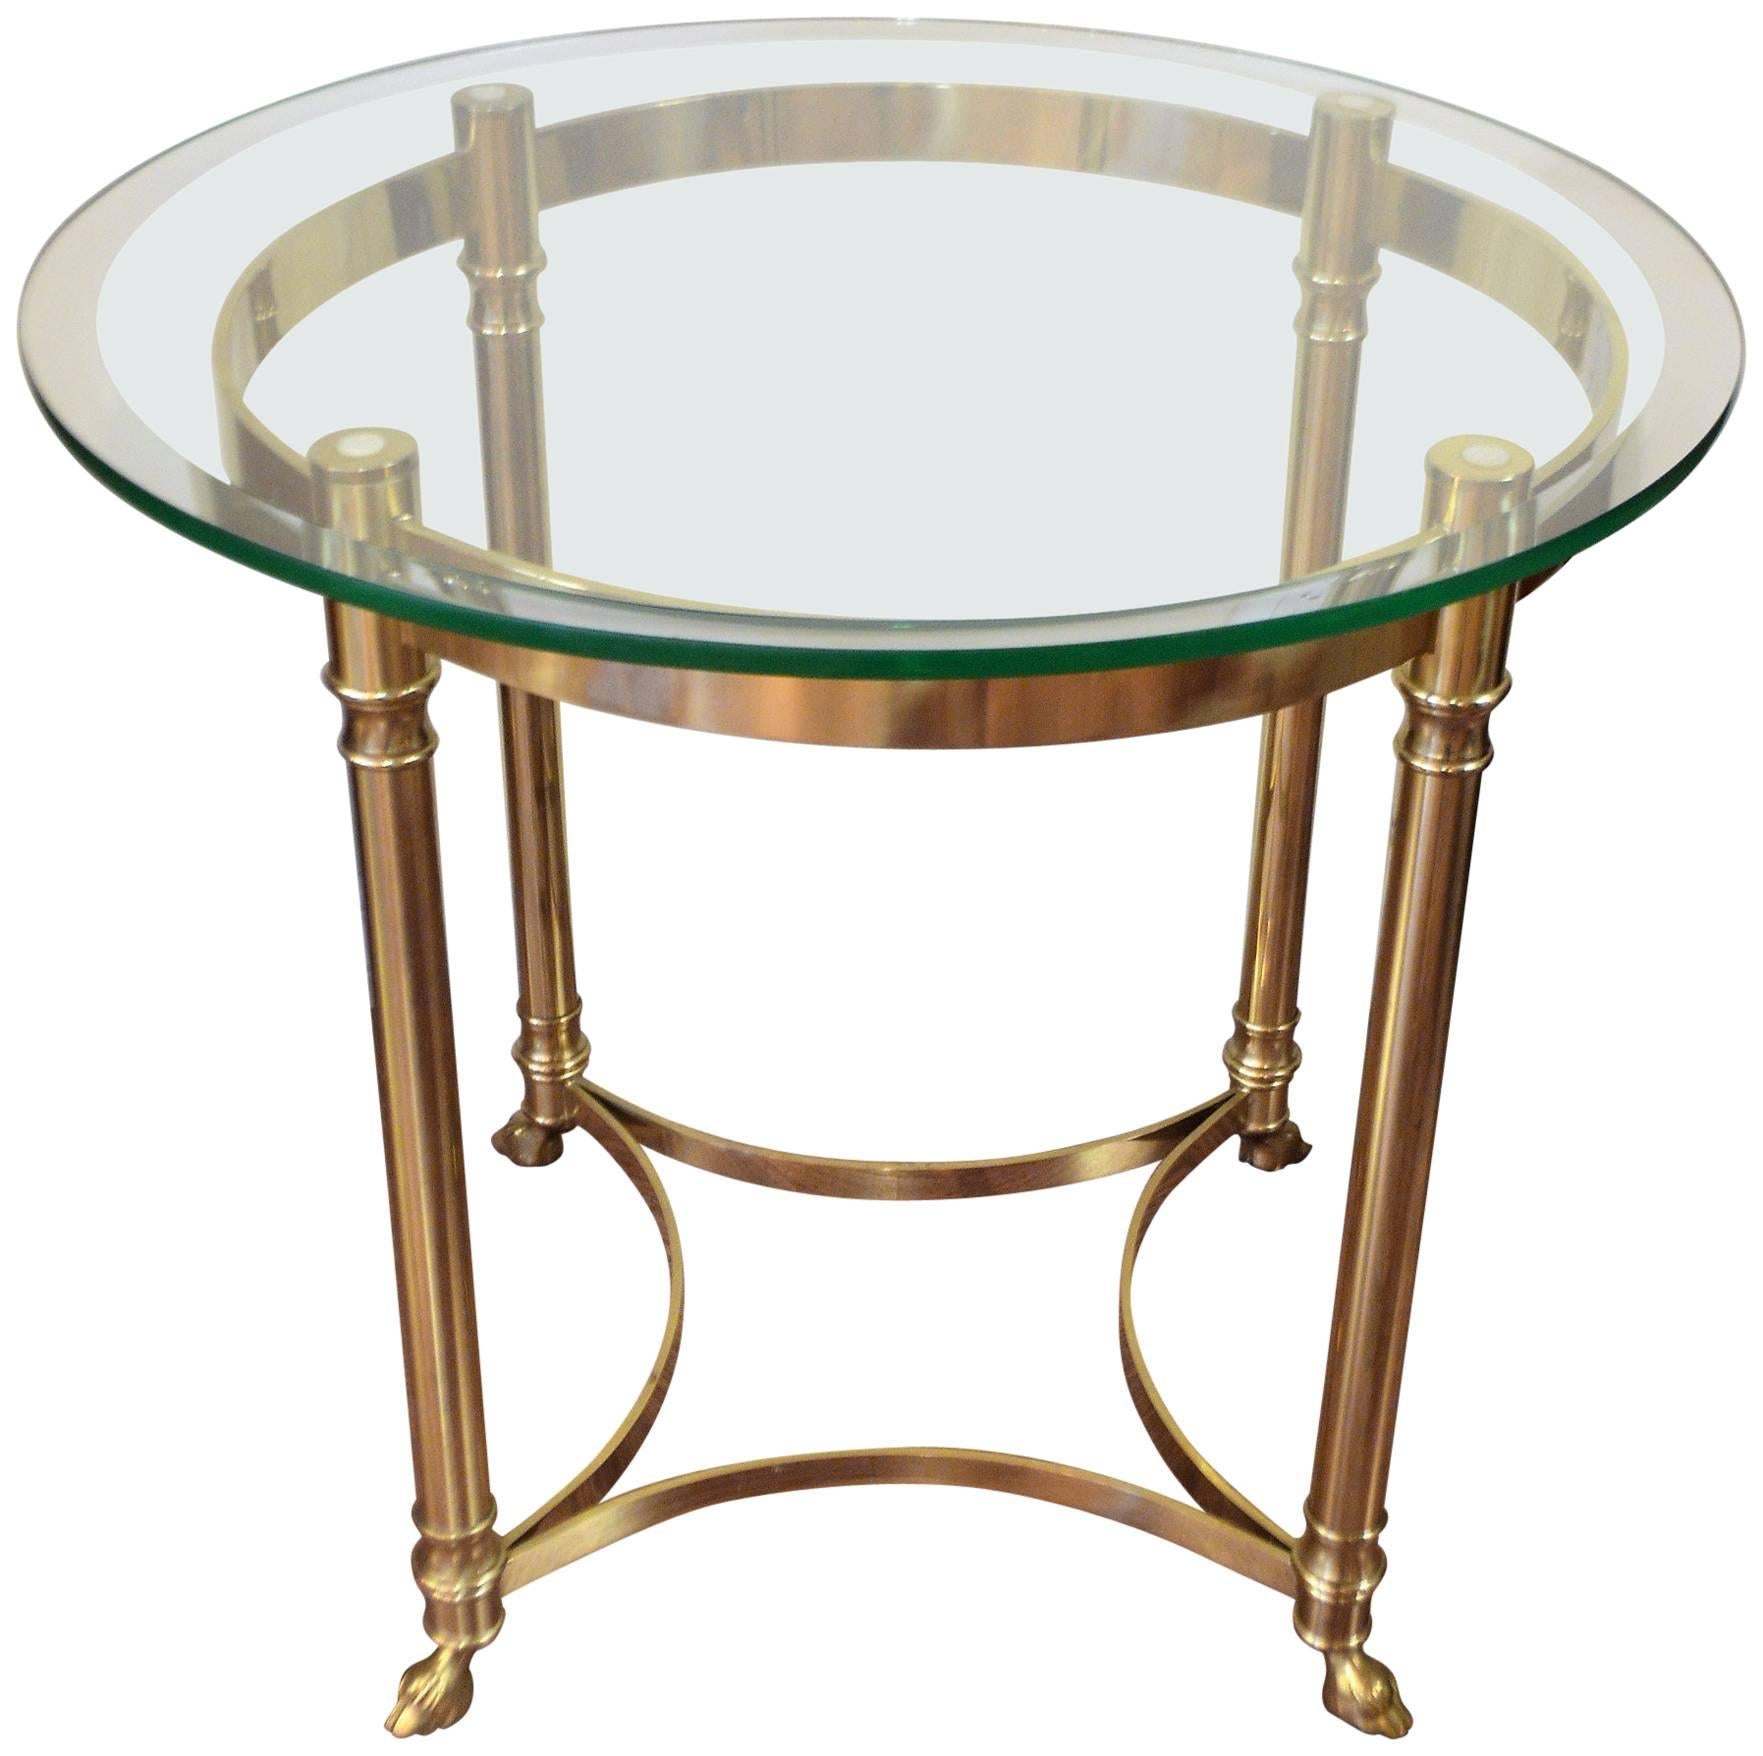 Mid-Century Modernist Polished Brass Side Table, Bevelled Glass Top & Hoof Feet